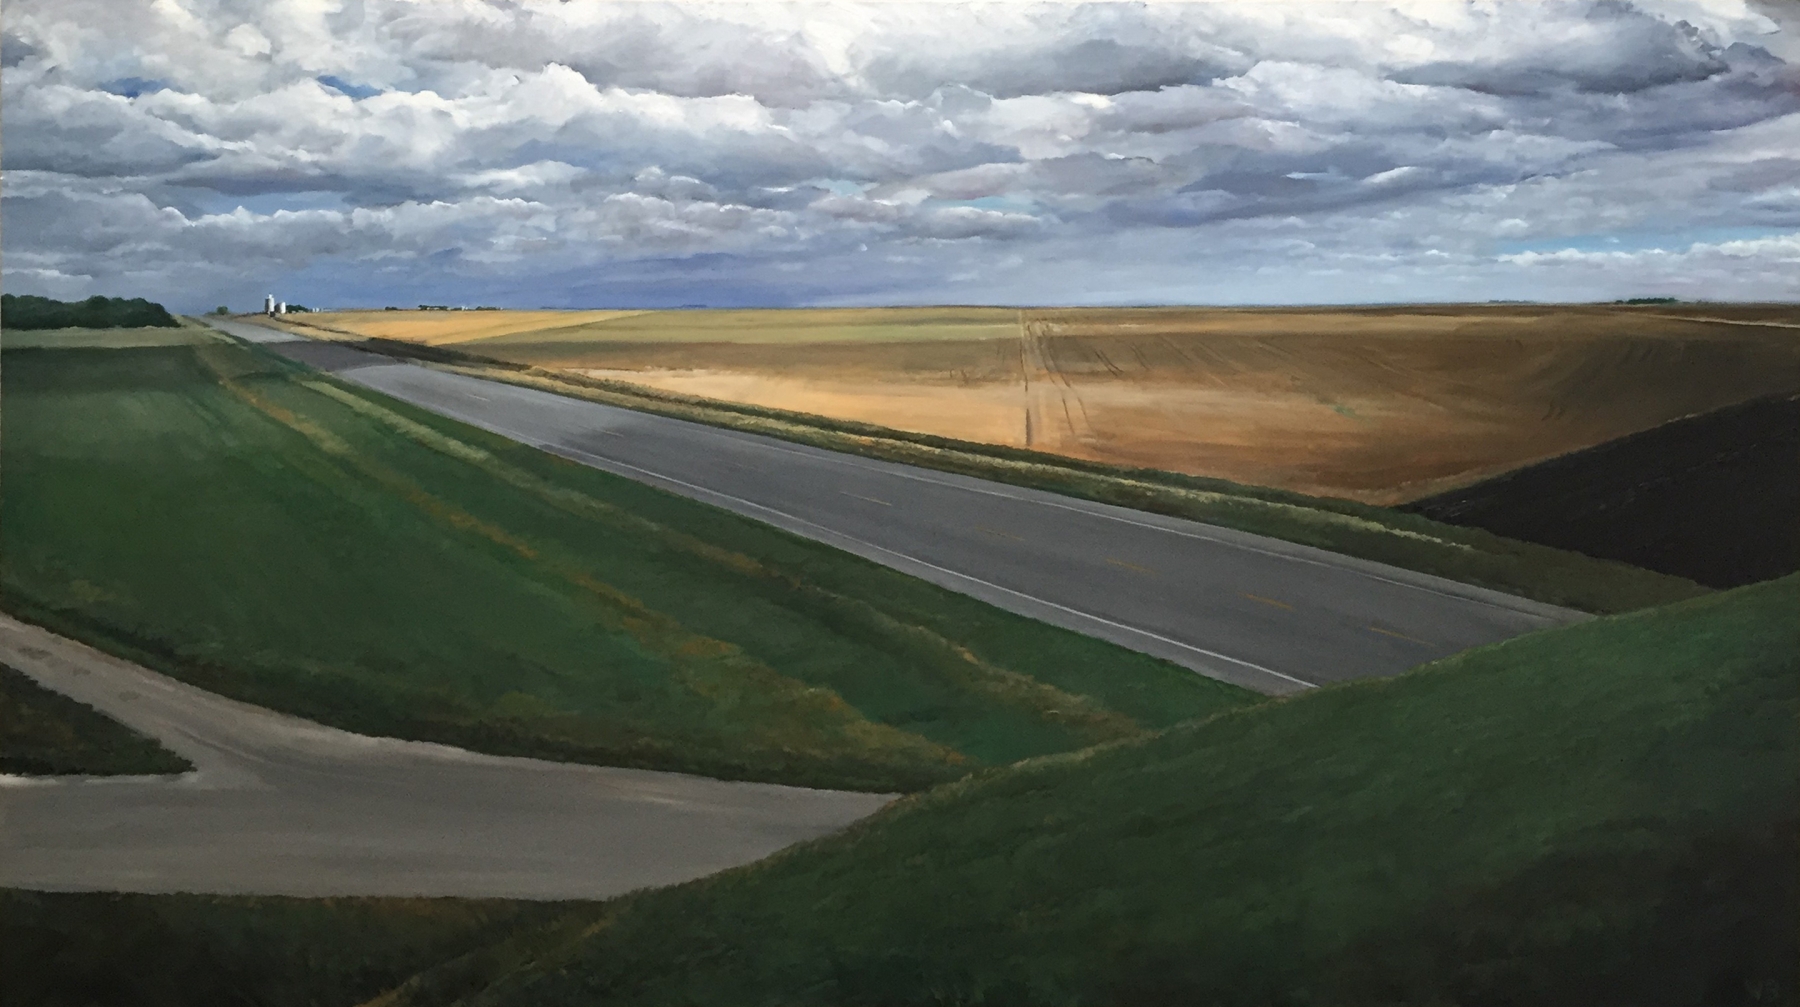 ​William Beckman,&nbsp;Montana, 2020, oil on canvas, 58 x 104 inches